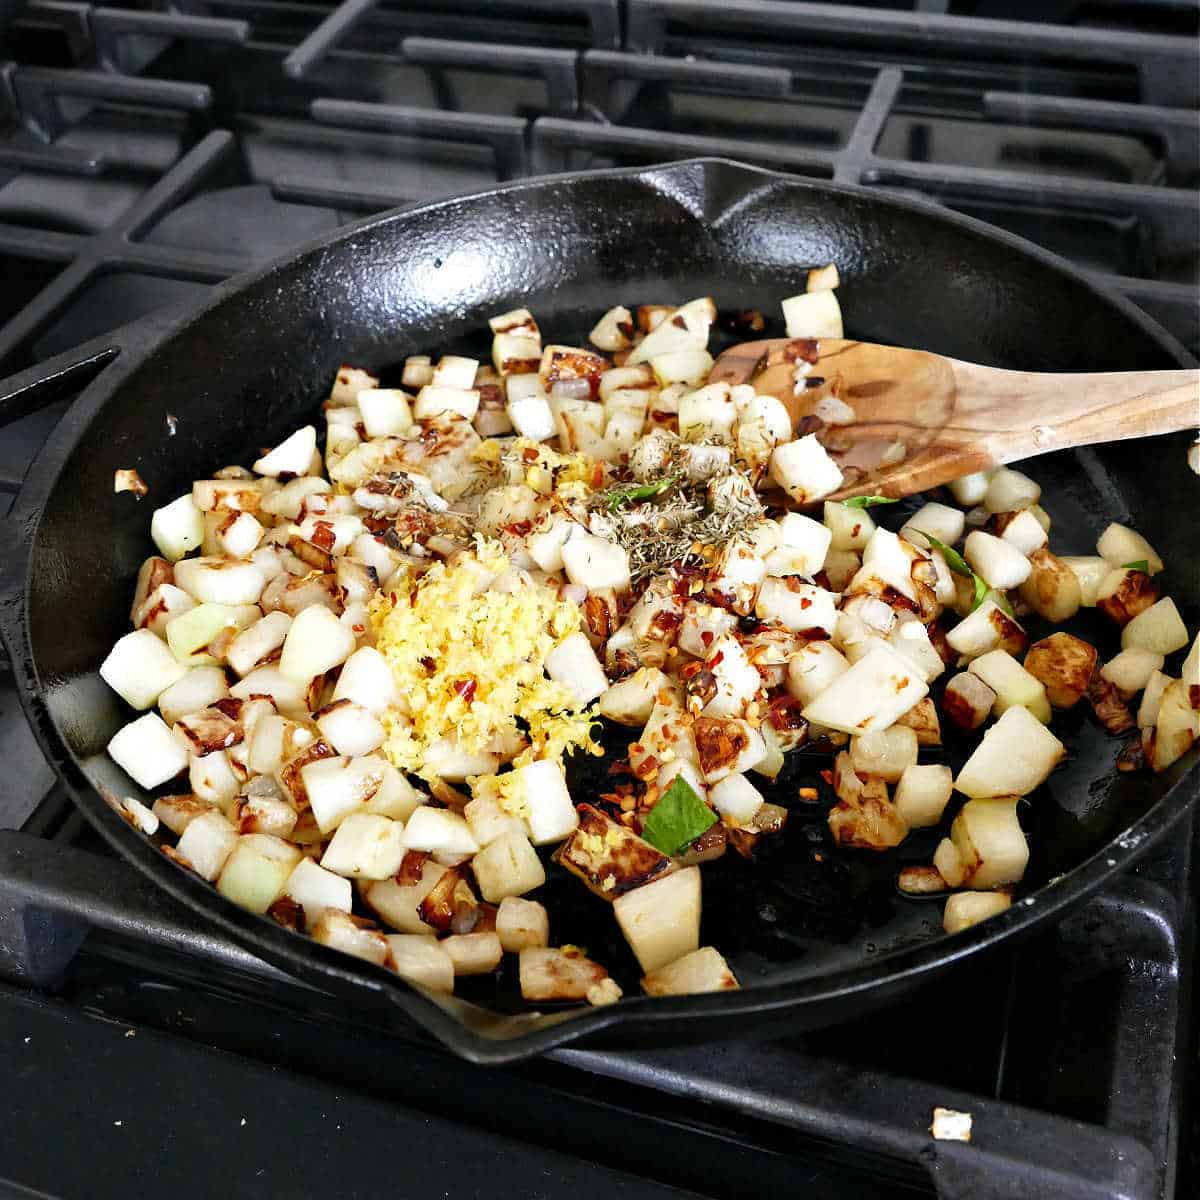 kohlrabi, onion, lemon zest, and spices cooking in oil in a cast iron skillet